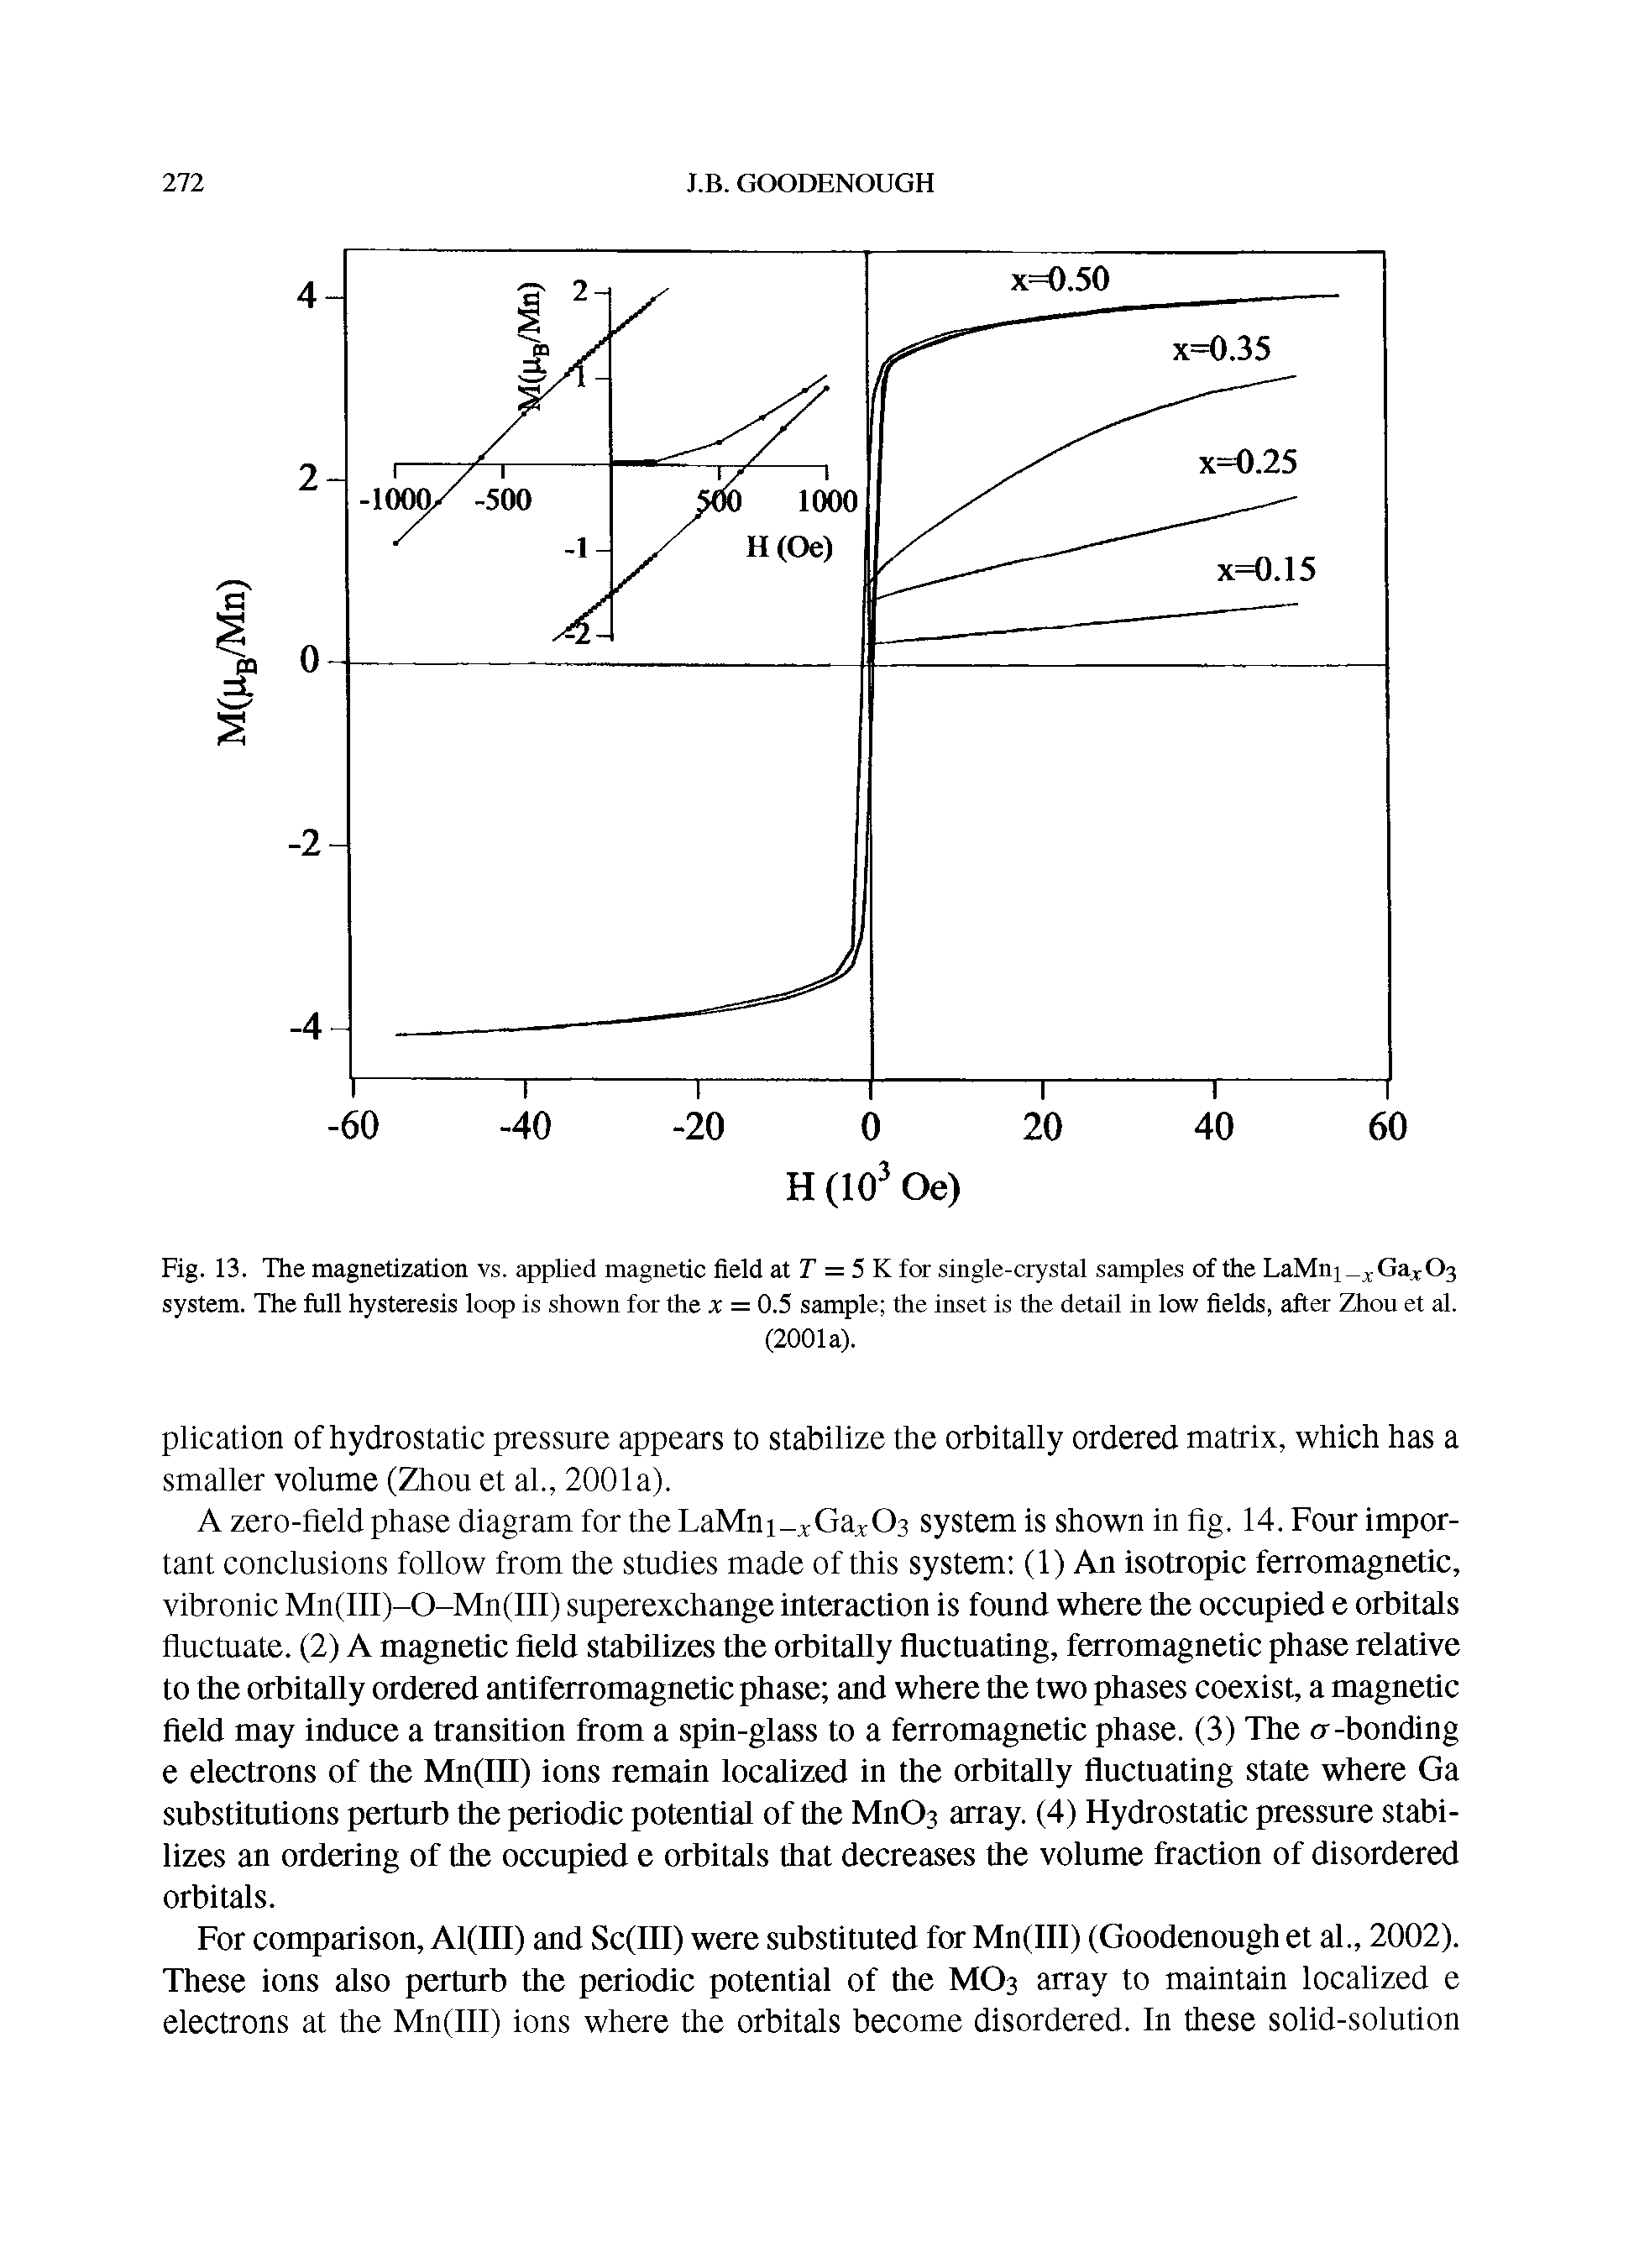 Fig. 13. The magnetization vs. applied magnetic field at T = 5 K for single-crystal samples of the LaMnj xGax03 system. The full hysteresis loop is shown for the x = 0.5 sample the inset is the detail in low fields, after Zhou et al.